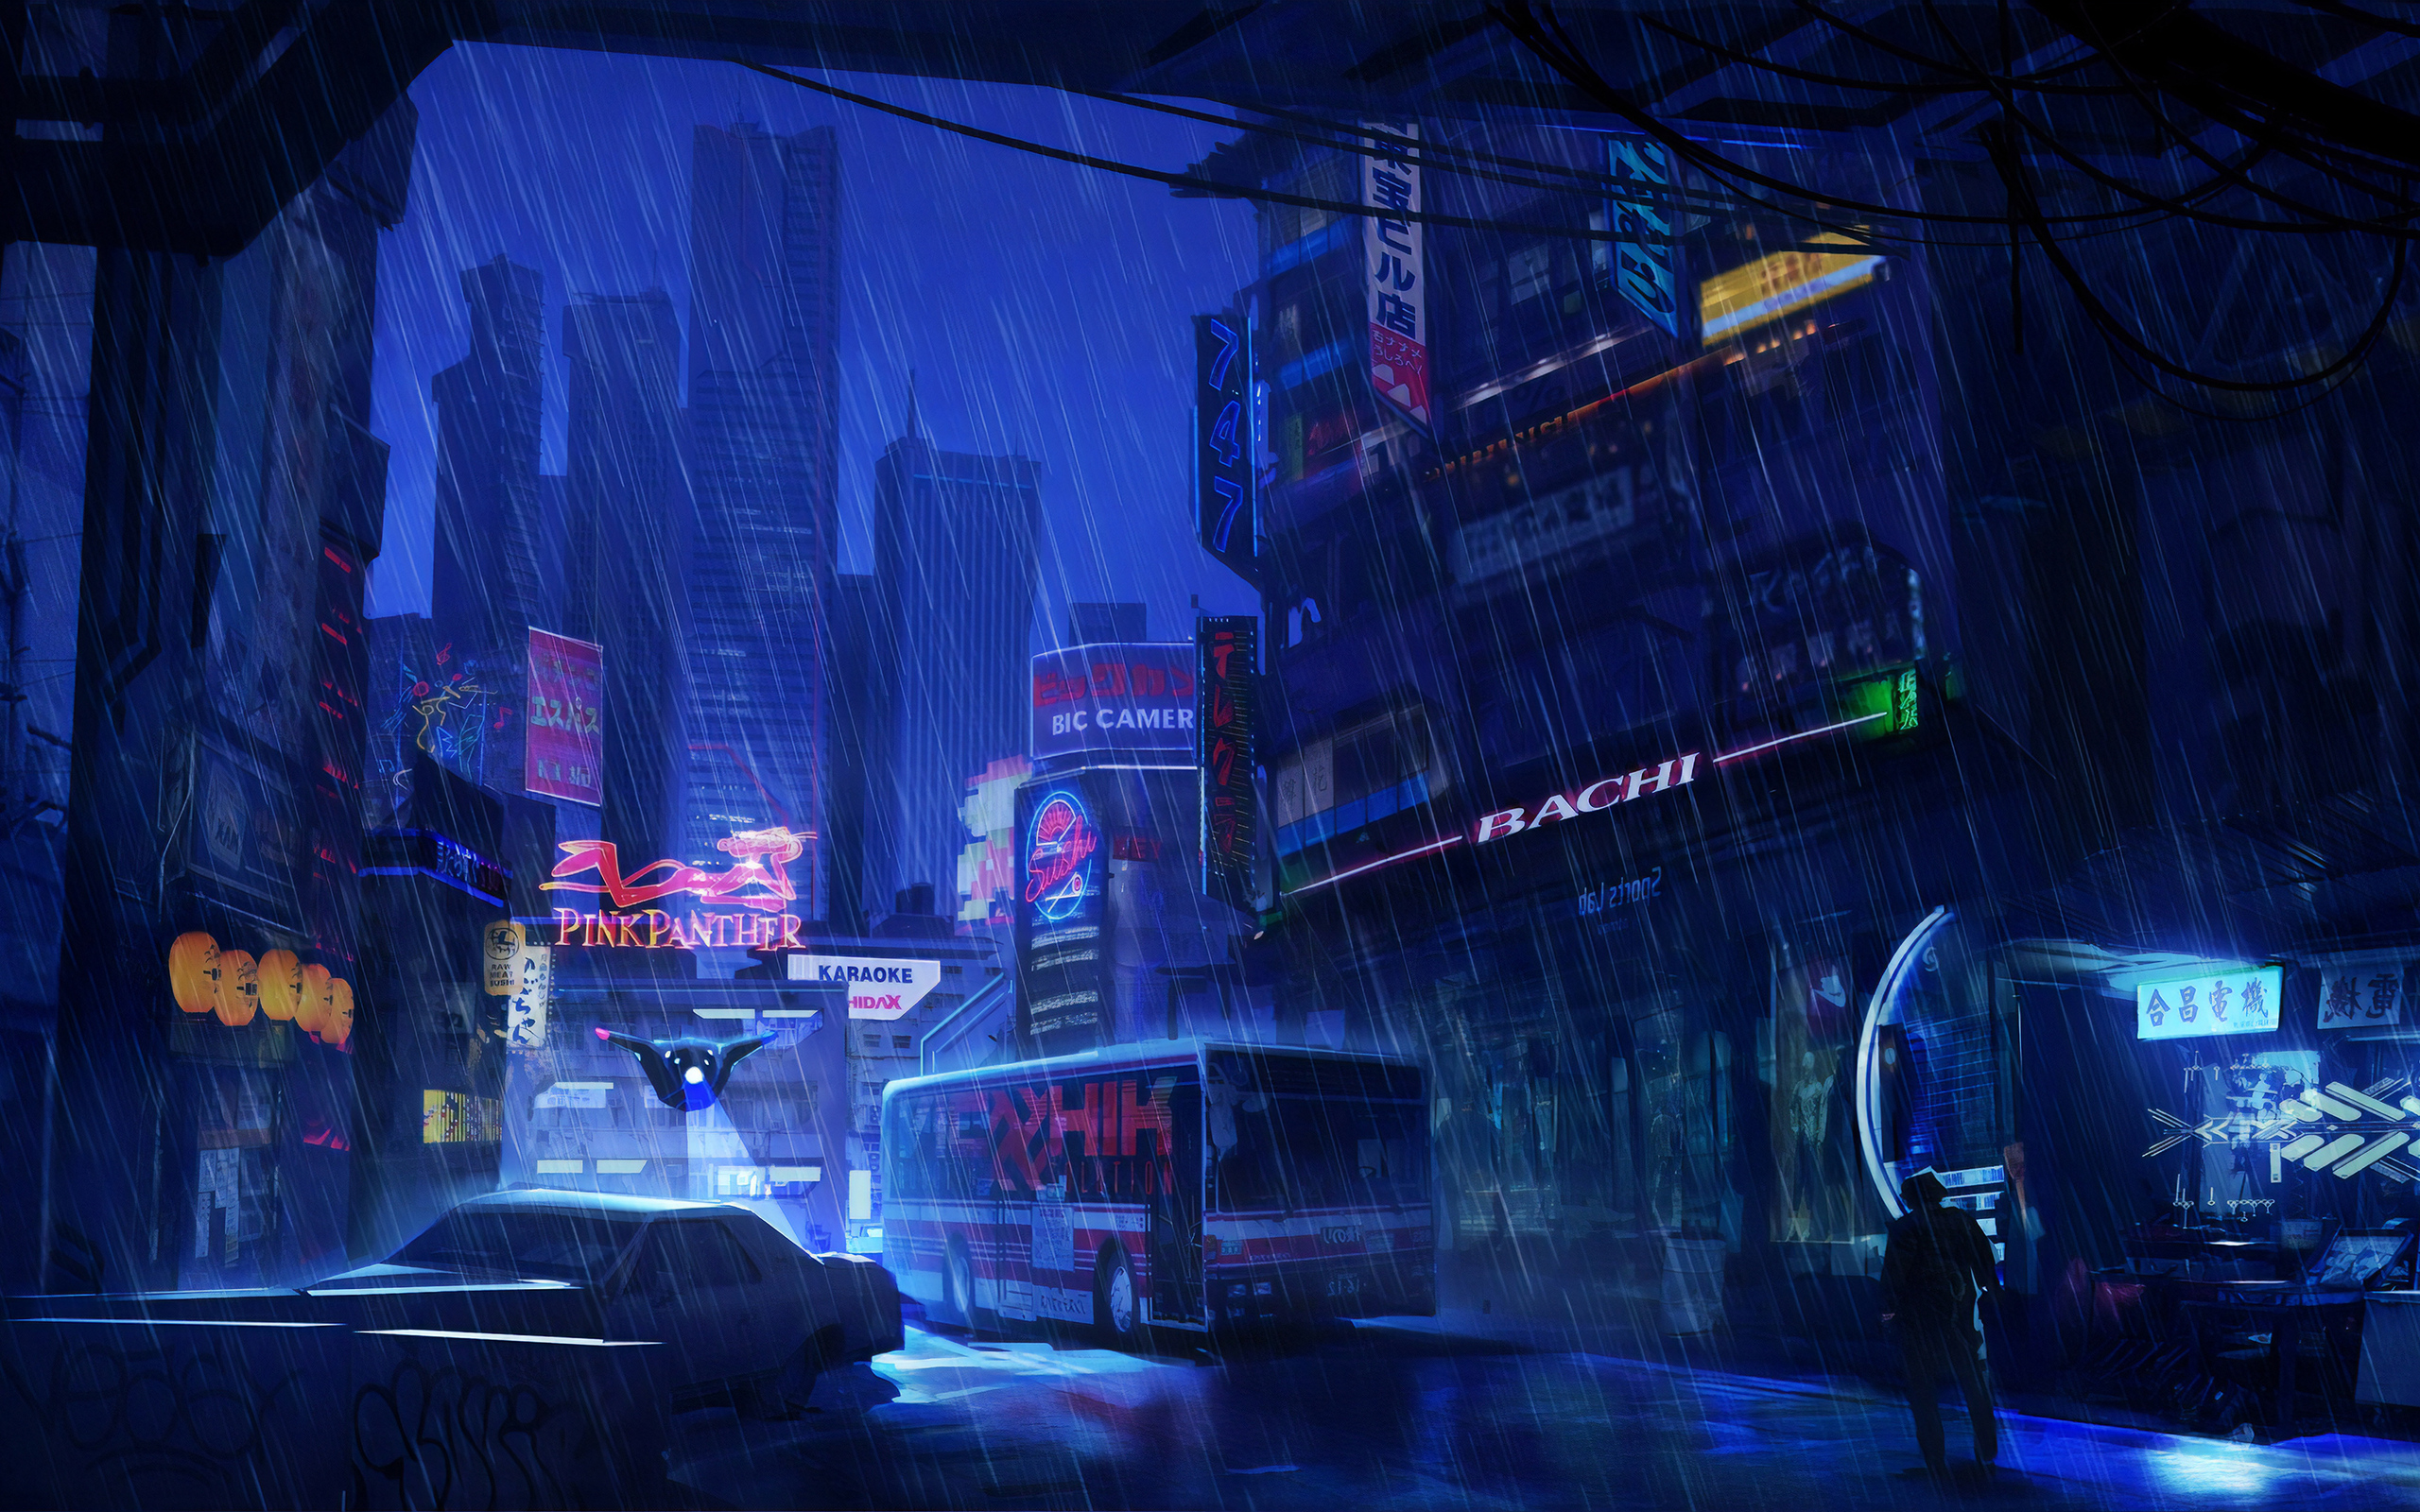 2560x1600 Futuristic City Dark Evening Rain 4k 2560x1600 Resolution Hd 4k Wallpapers Images Backgrounds Photos And Pictures